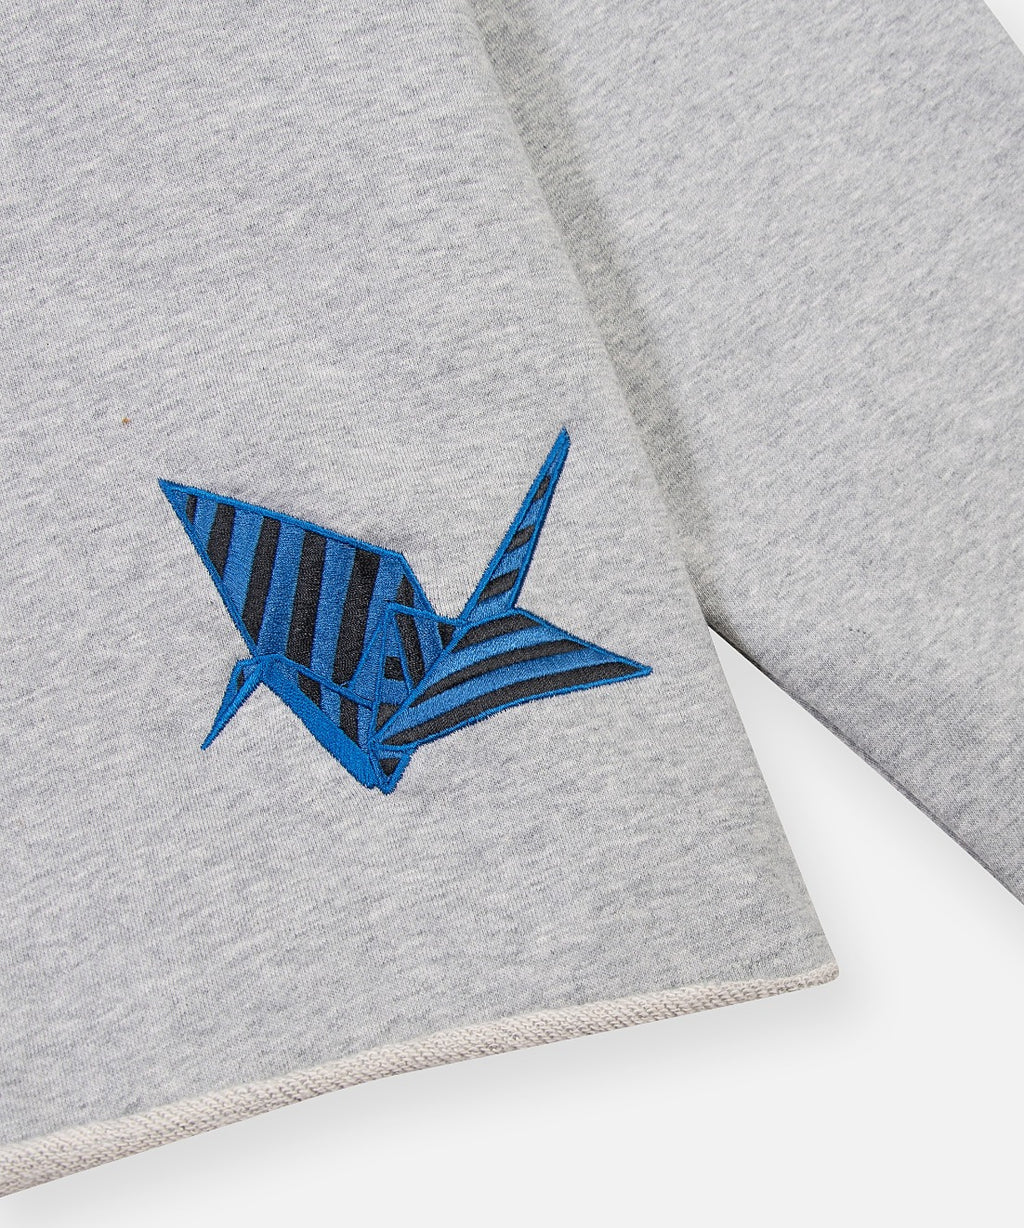  Embroidered paper crane on Paper Cranes Scarf-Tie Hoodie by Paper Planes.